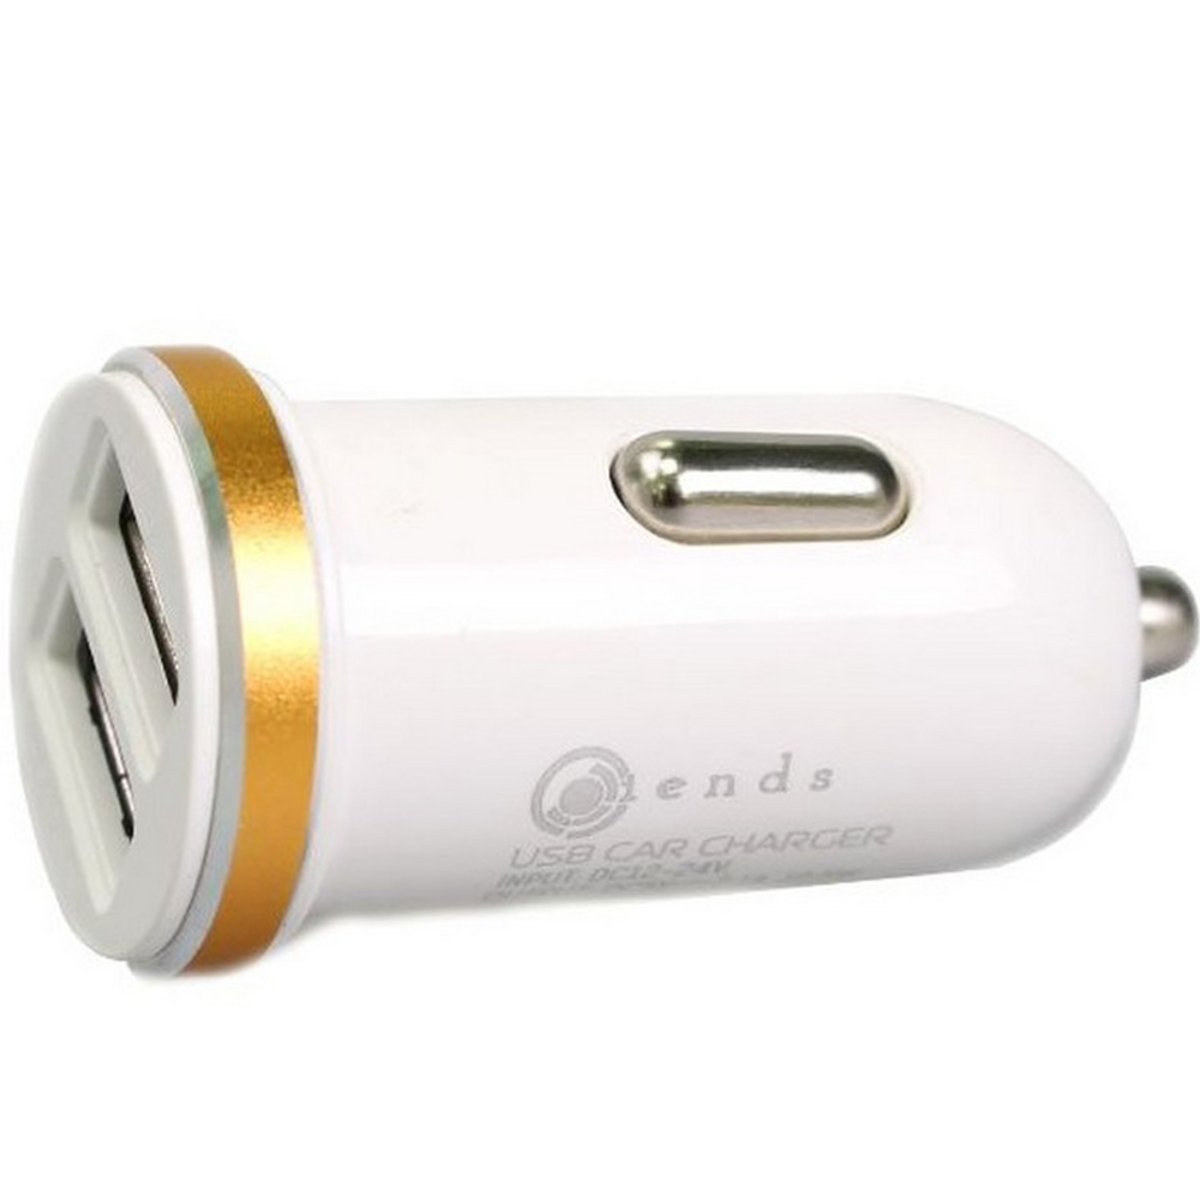 Iends Dual USB Car Charger AD498